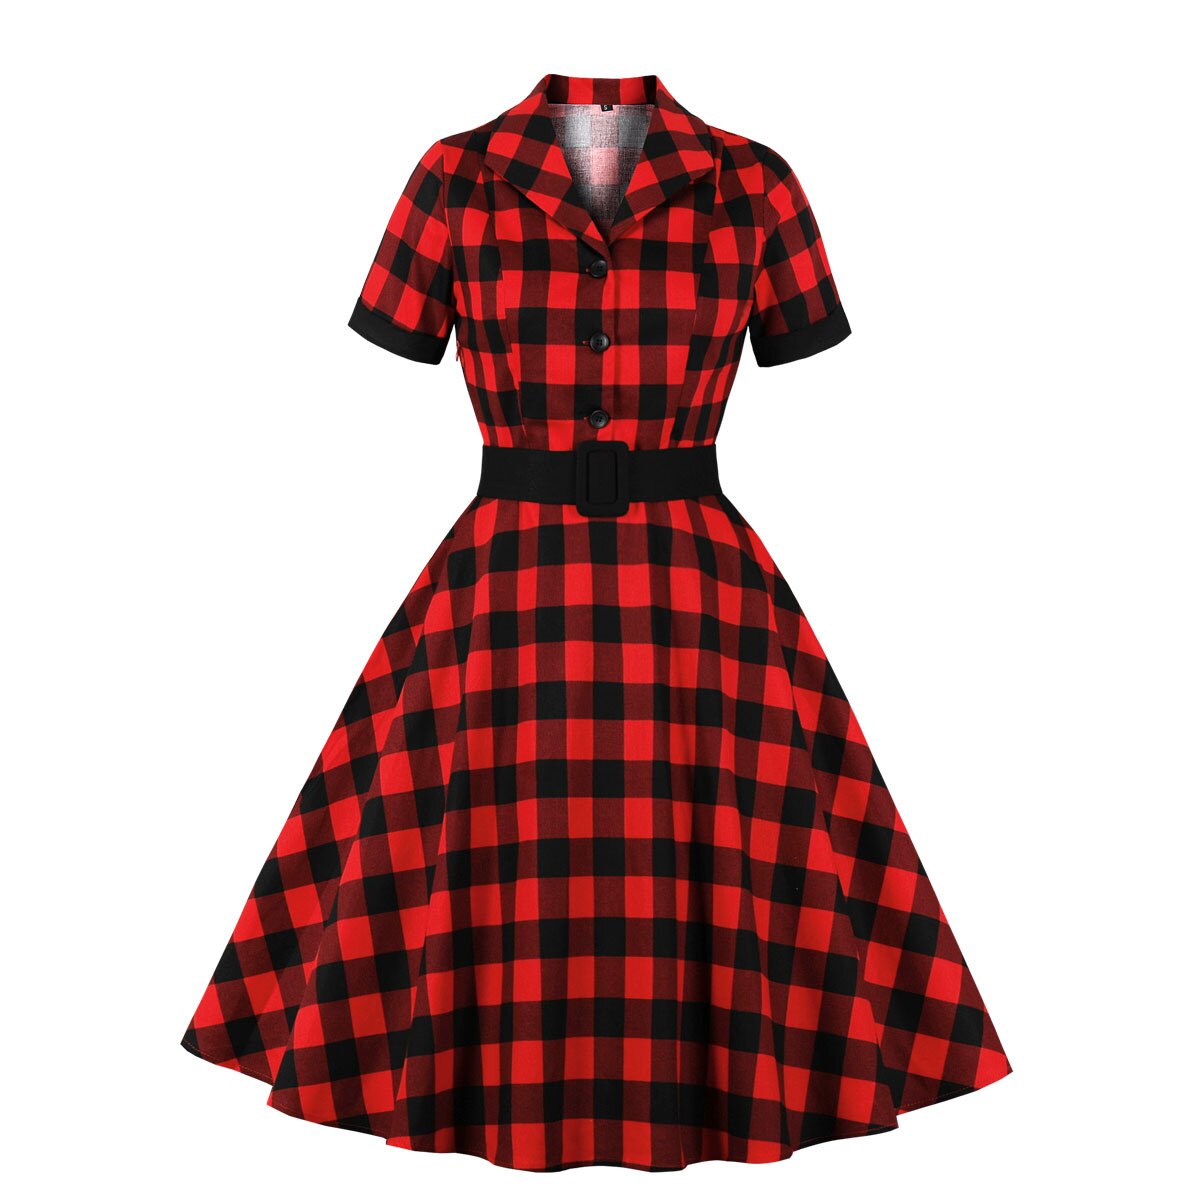 1950s Plaid Print Vintage Cotton Short Sleeve Button Tunic Robe Pin Up Swing Retro Casual Dress